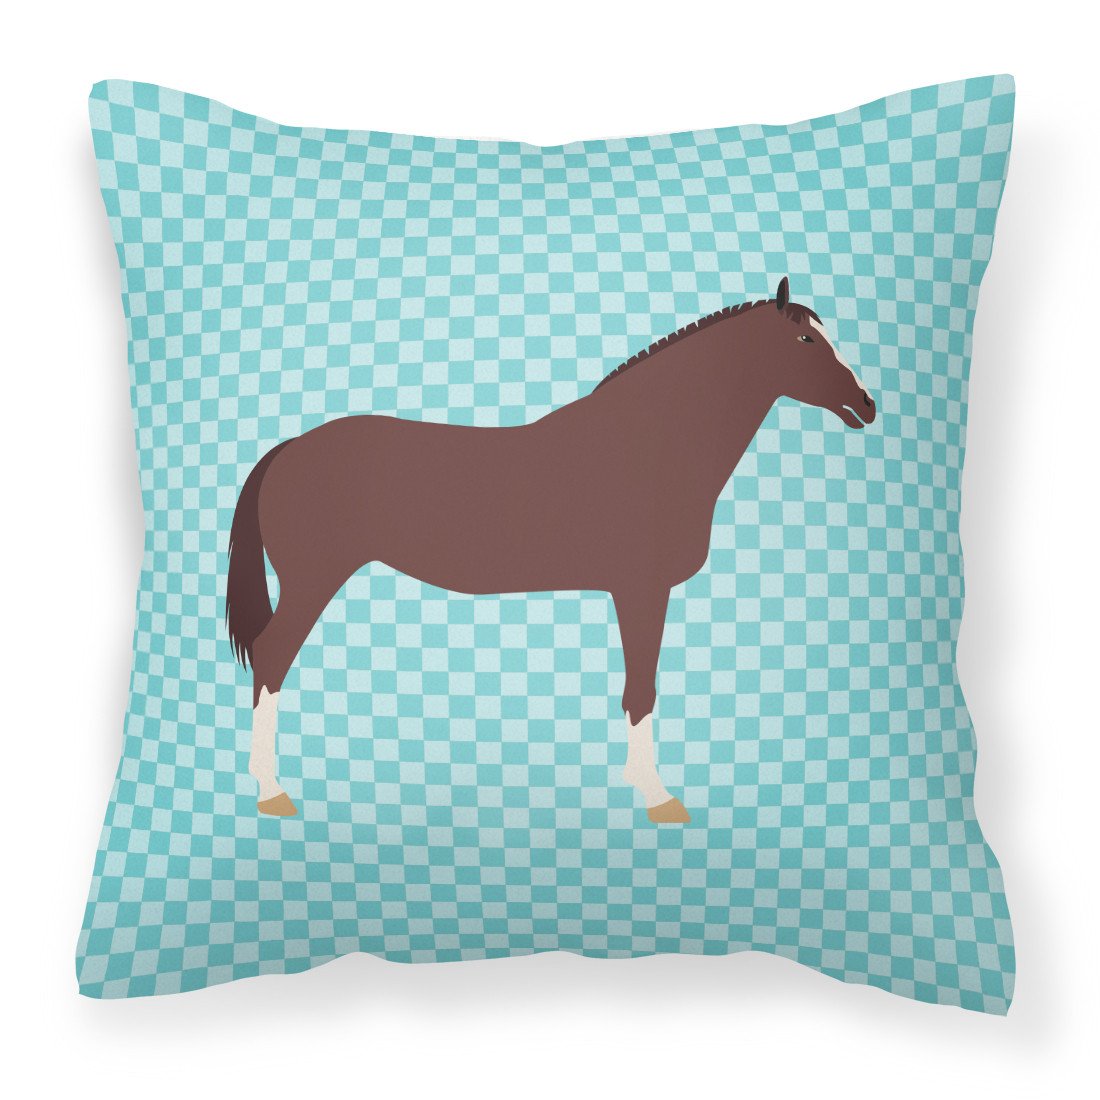 English Thoroughbred Horse Blue Check Fabric Decorative Pillow BB8087PW1818 by Caroline's Treasures